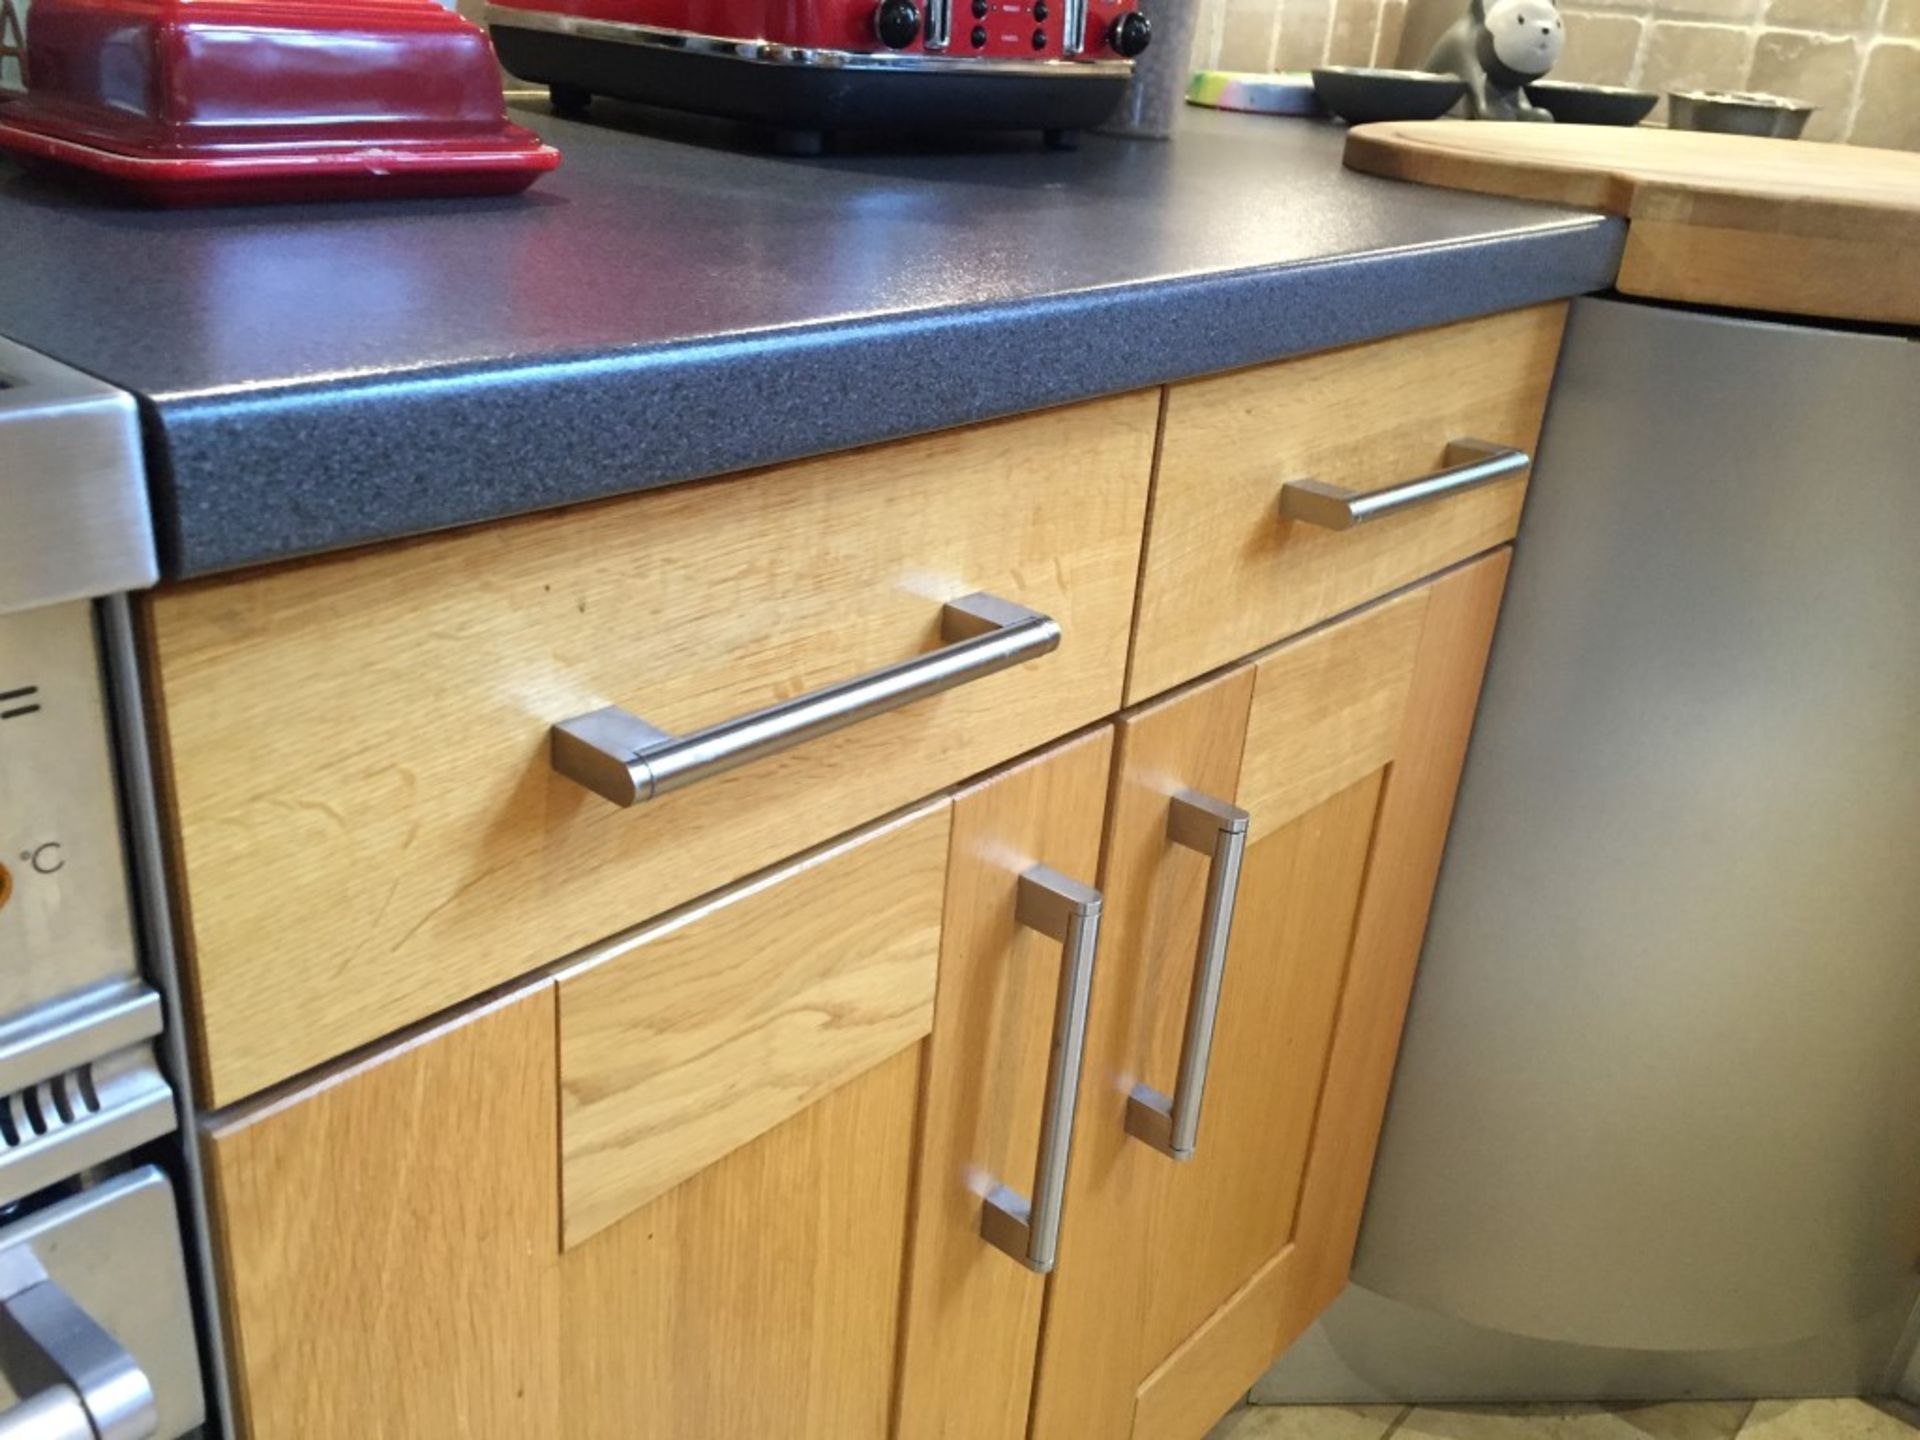 1 x Solid Wood Kitchen By English Rose With Breakfast Bar/Central Island Unit, Laminate Worktops And - Image 8 of 40